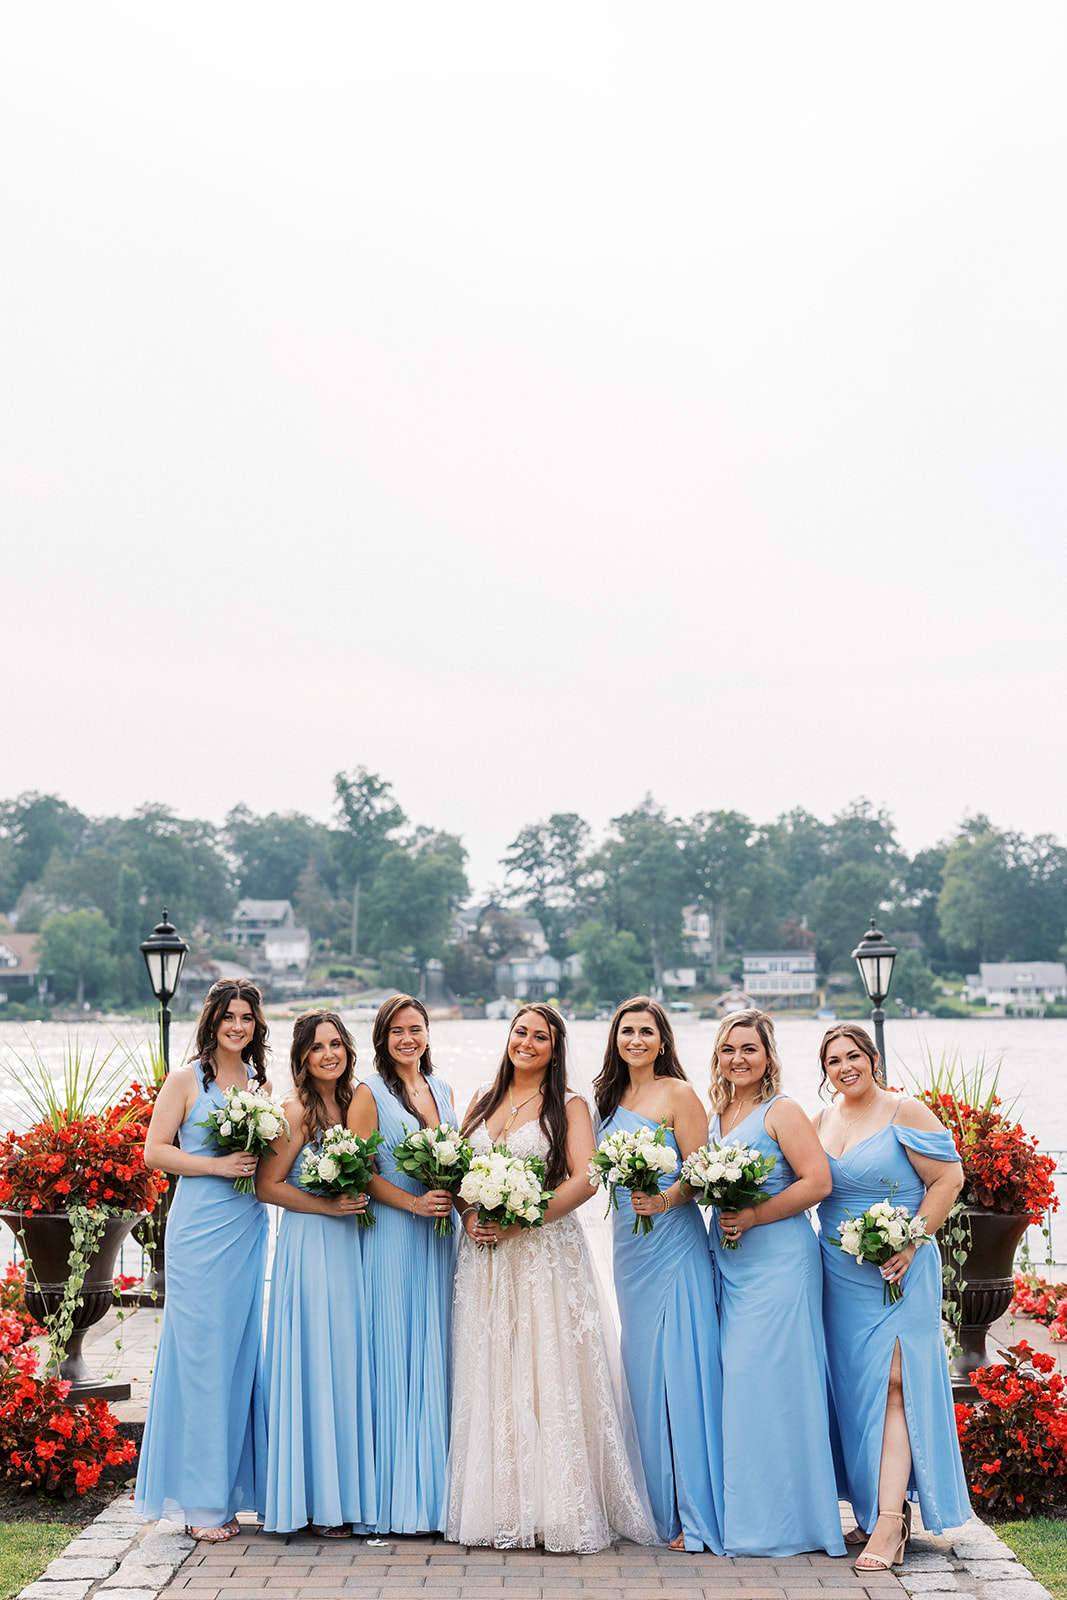 A bride stands with her bridal party in blue dresses surrounded by red flowers on the waterfront